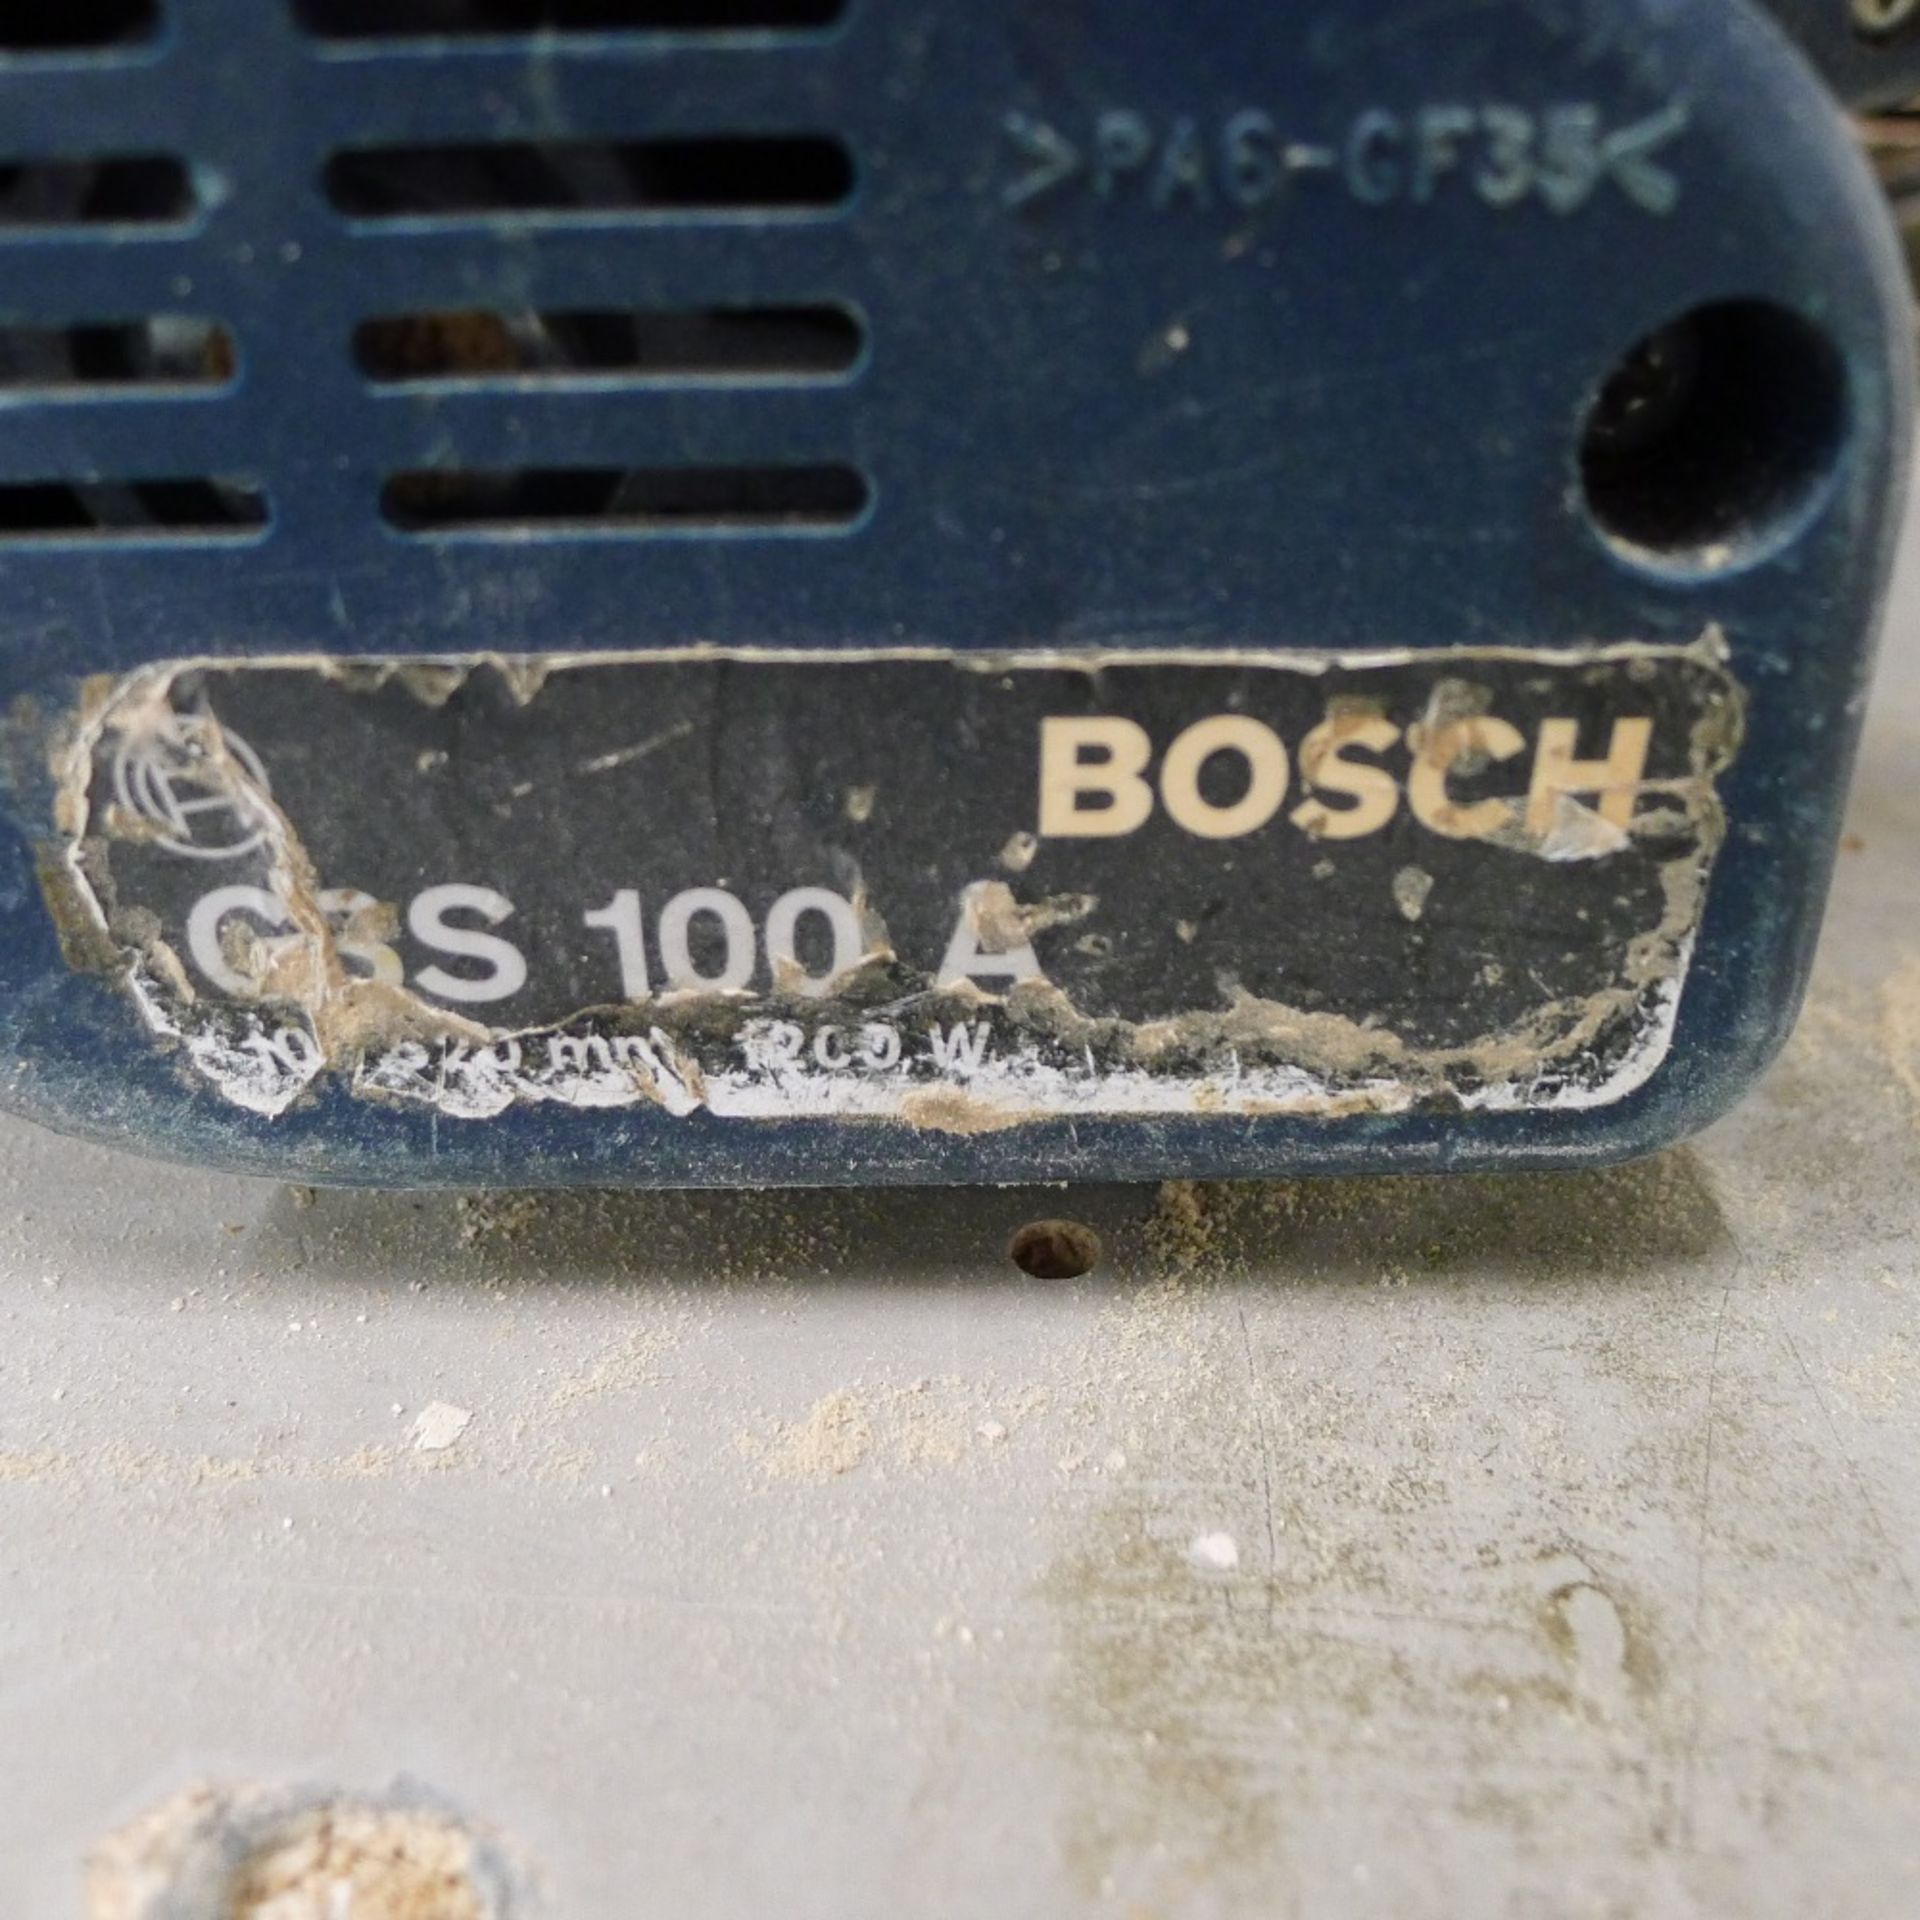 1 belt sander by Bosch type GBS 100A, 240v and a quantity of Mirka sanding belts - Image 2 of 2